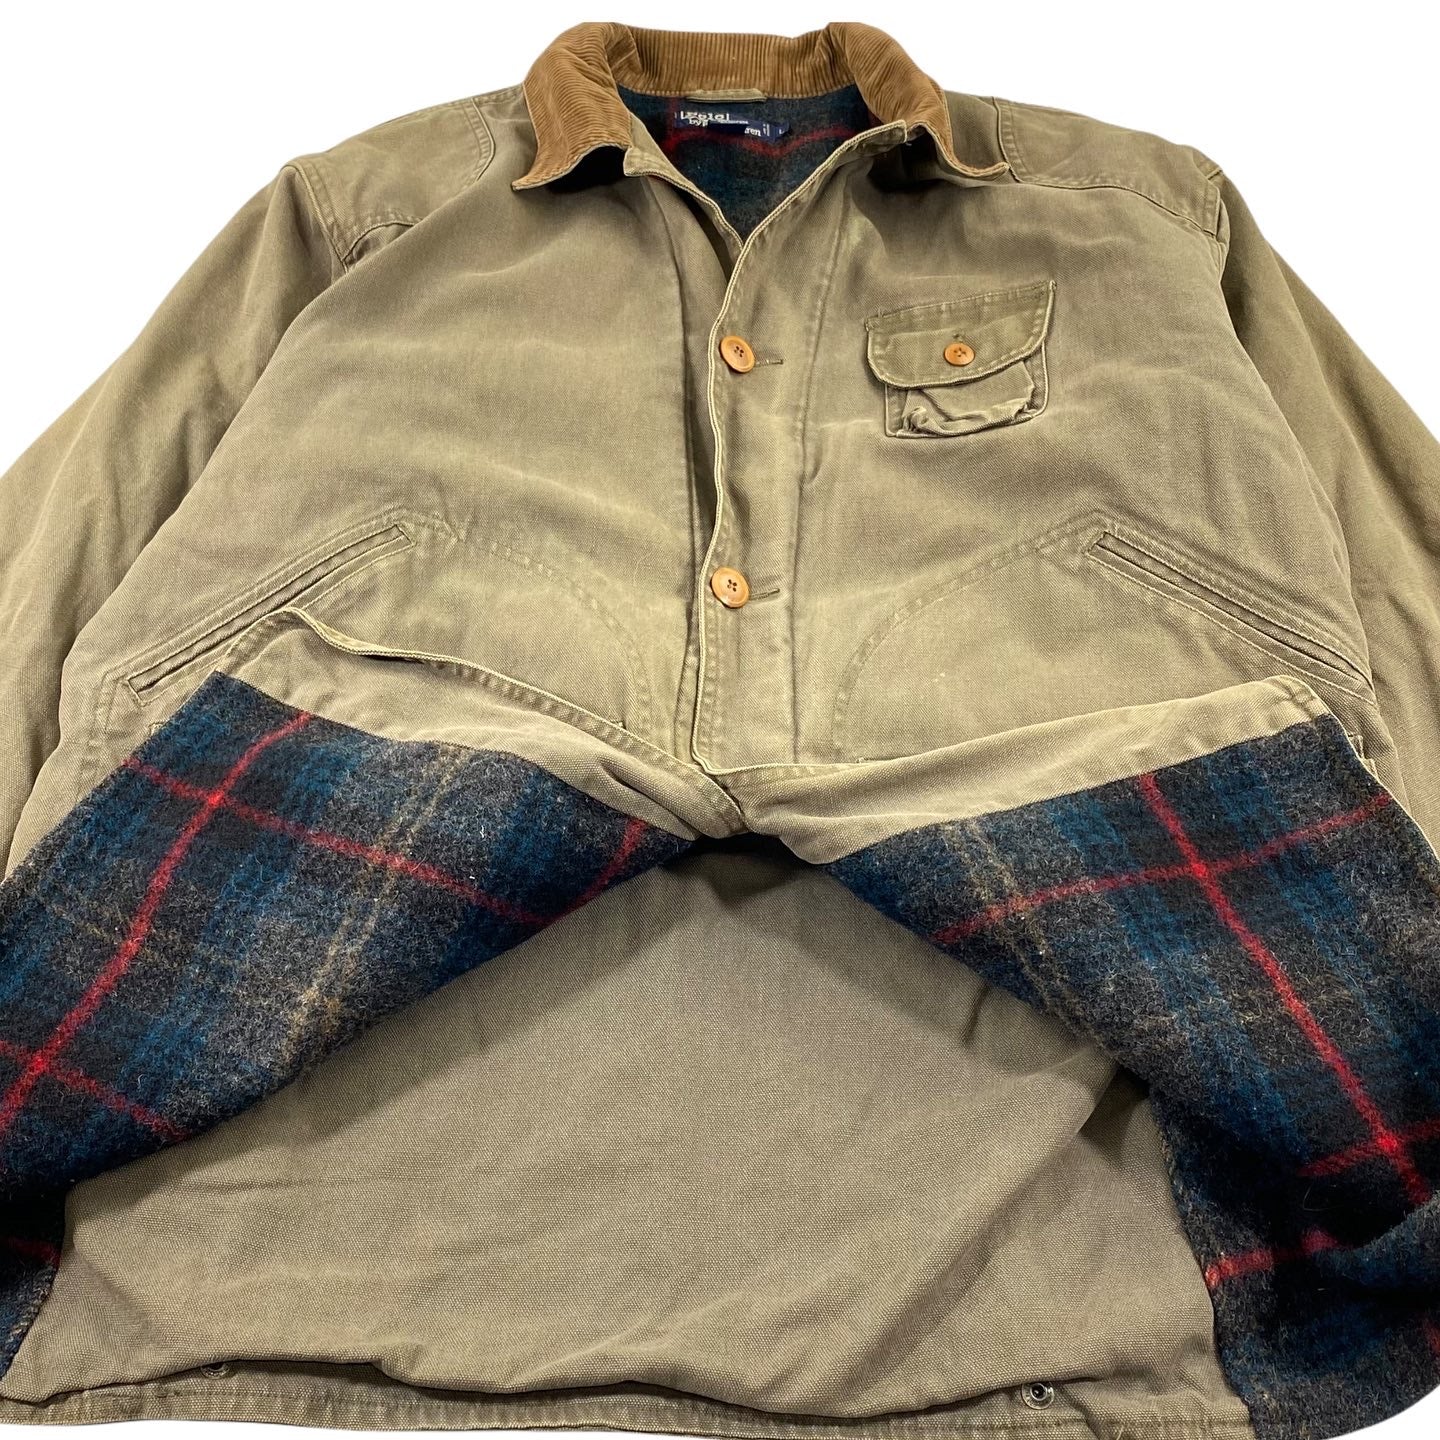 Polo ralph lauren wool lined hunting jacket large